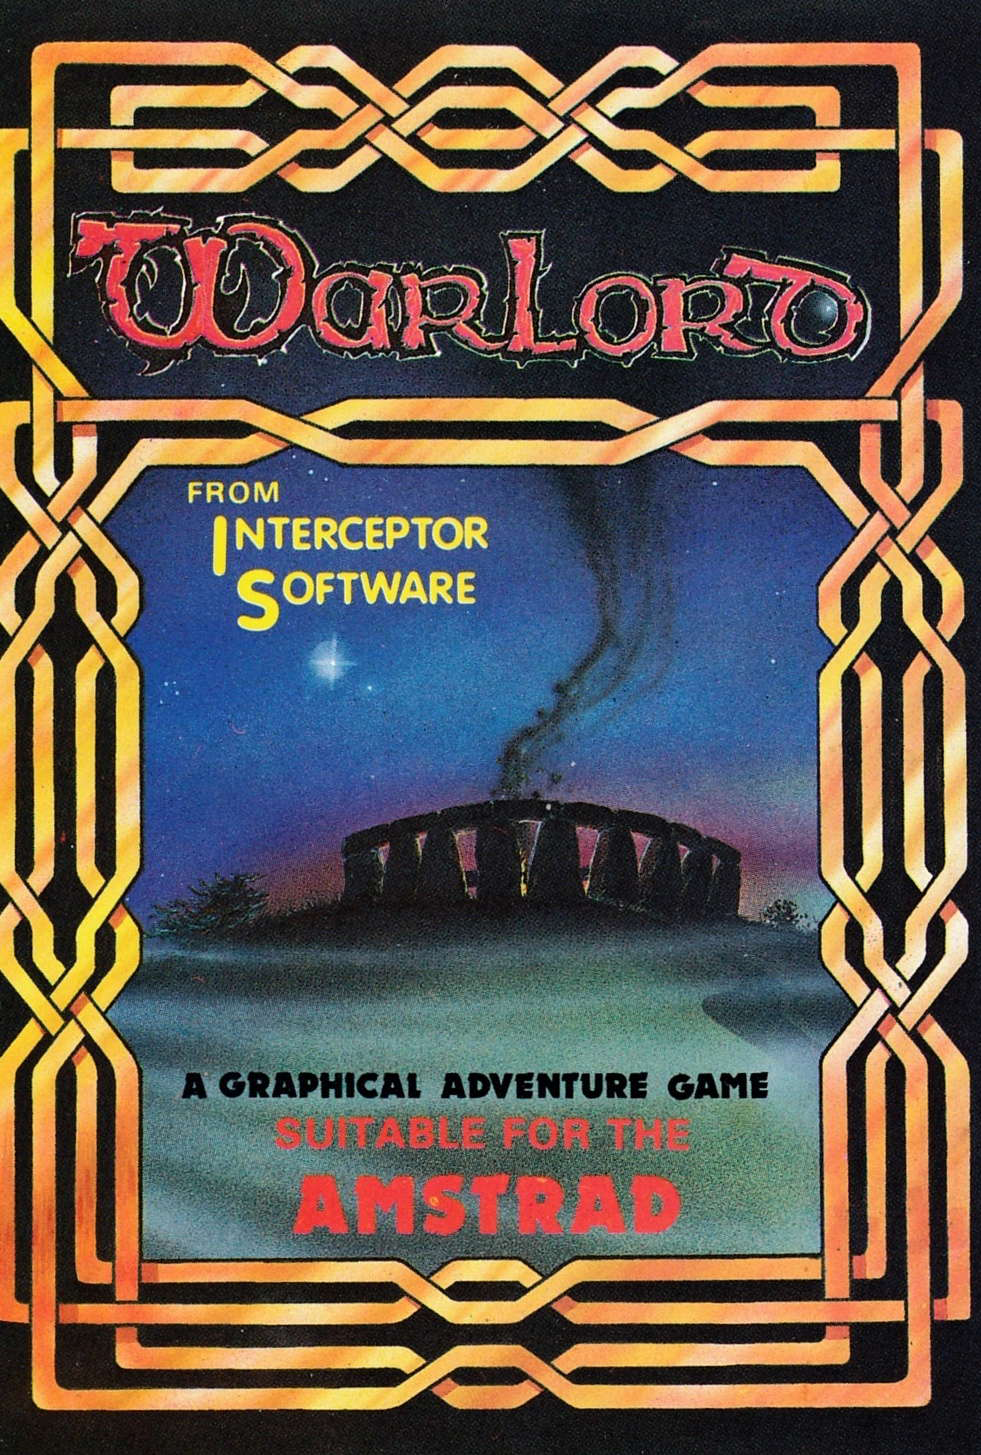 screenshot of the Amstrad CPC game Warlord by GameBase CPC